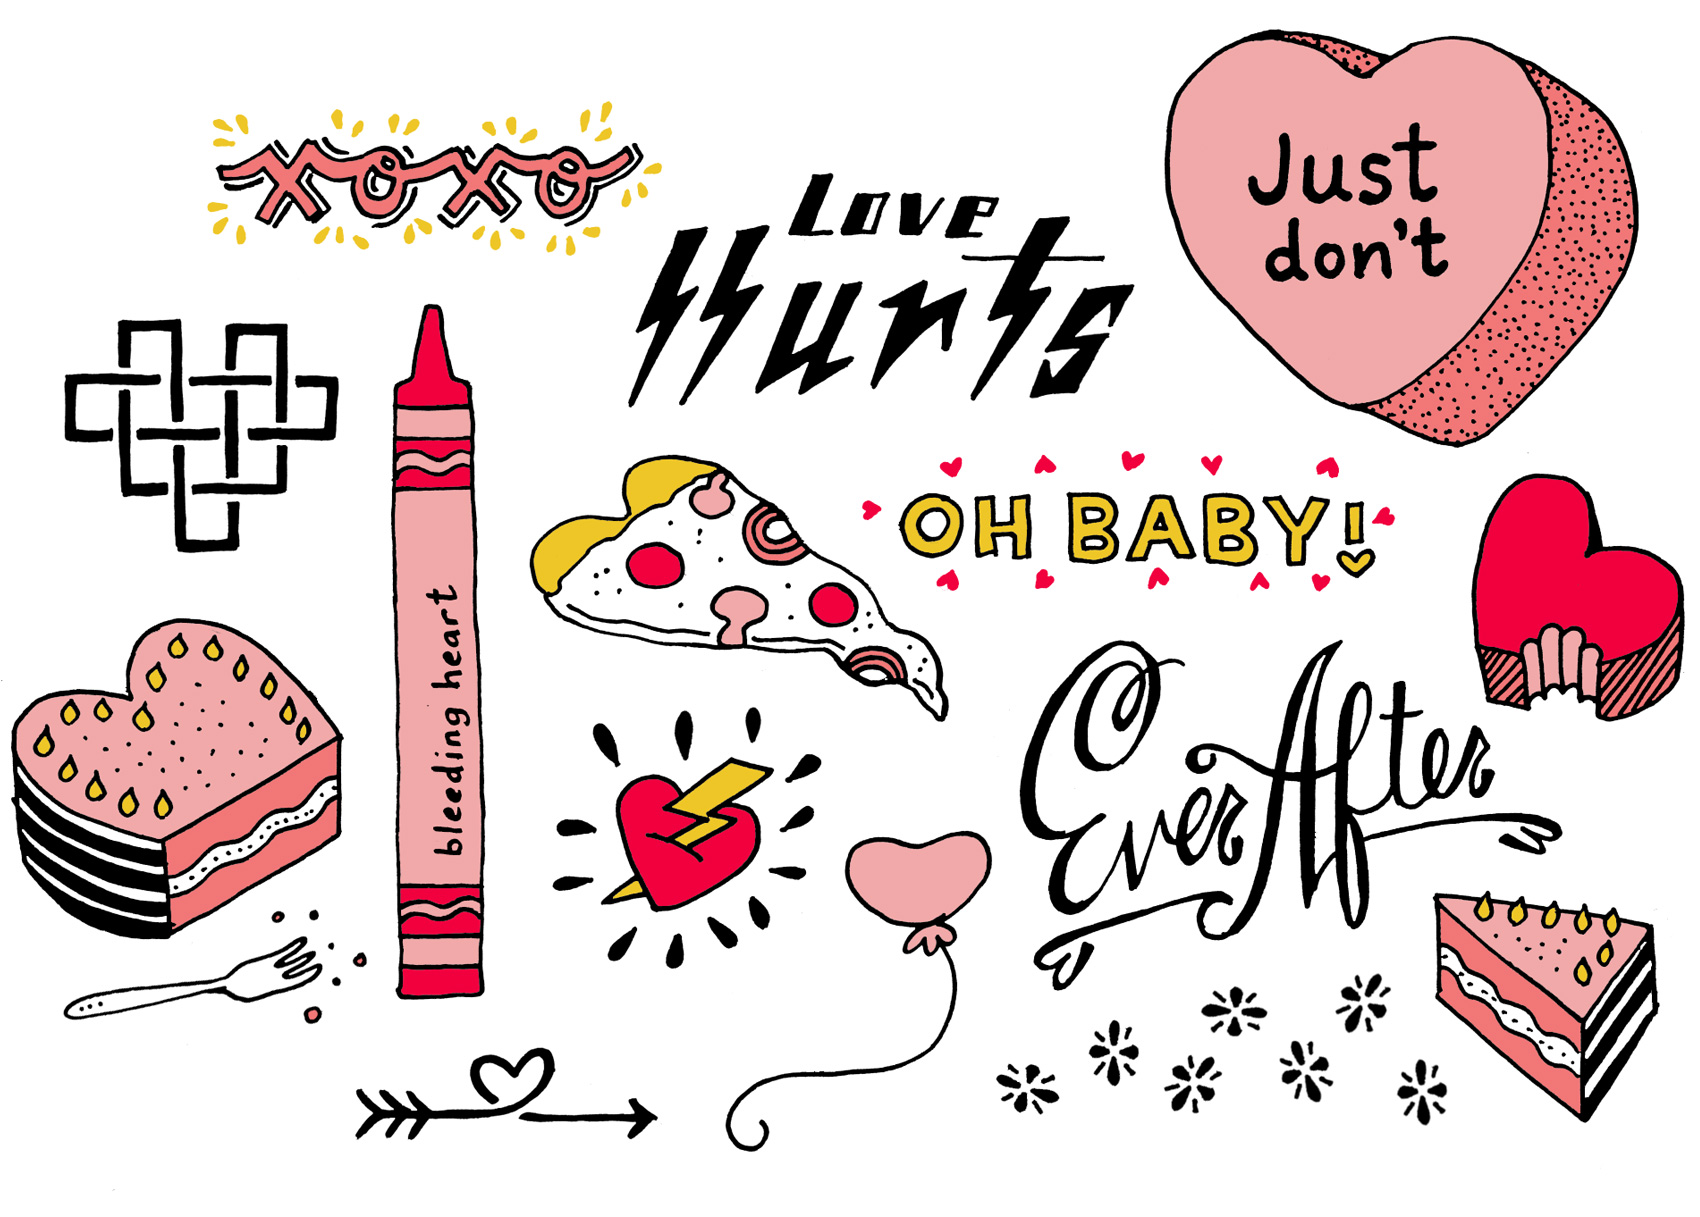 valentine day tattoos: love hurts, XOXO, ever after, oh baby, just don't, bleeding heart, and more!